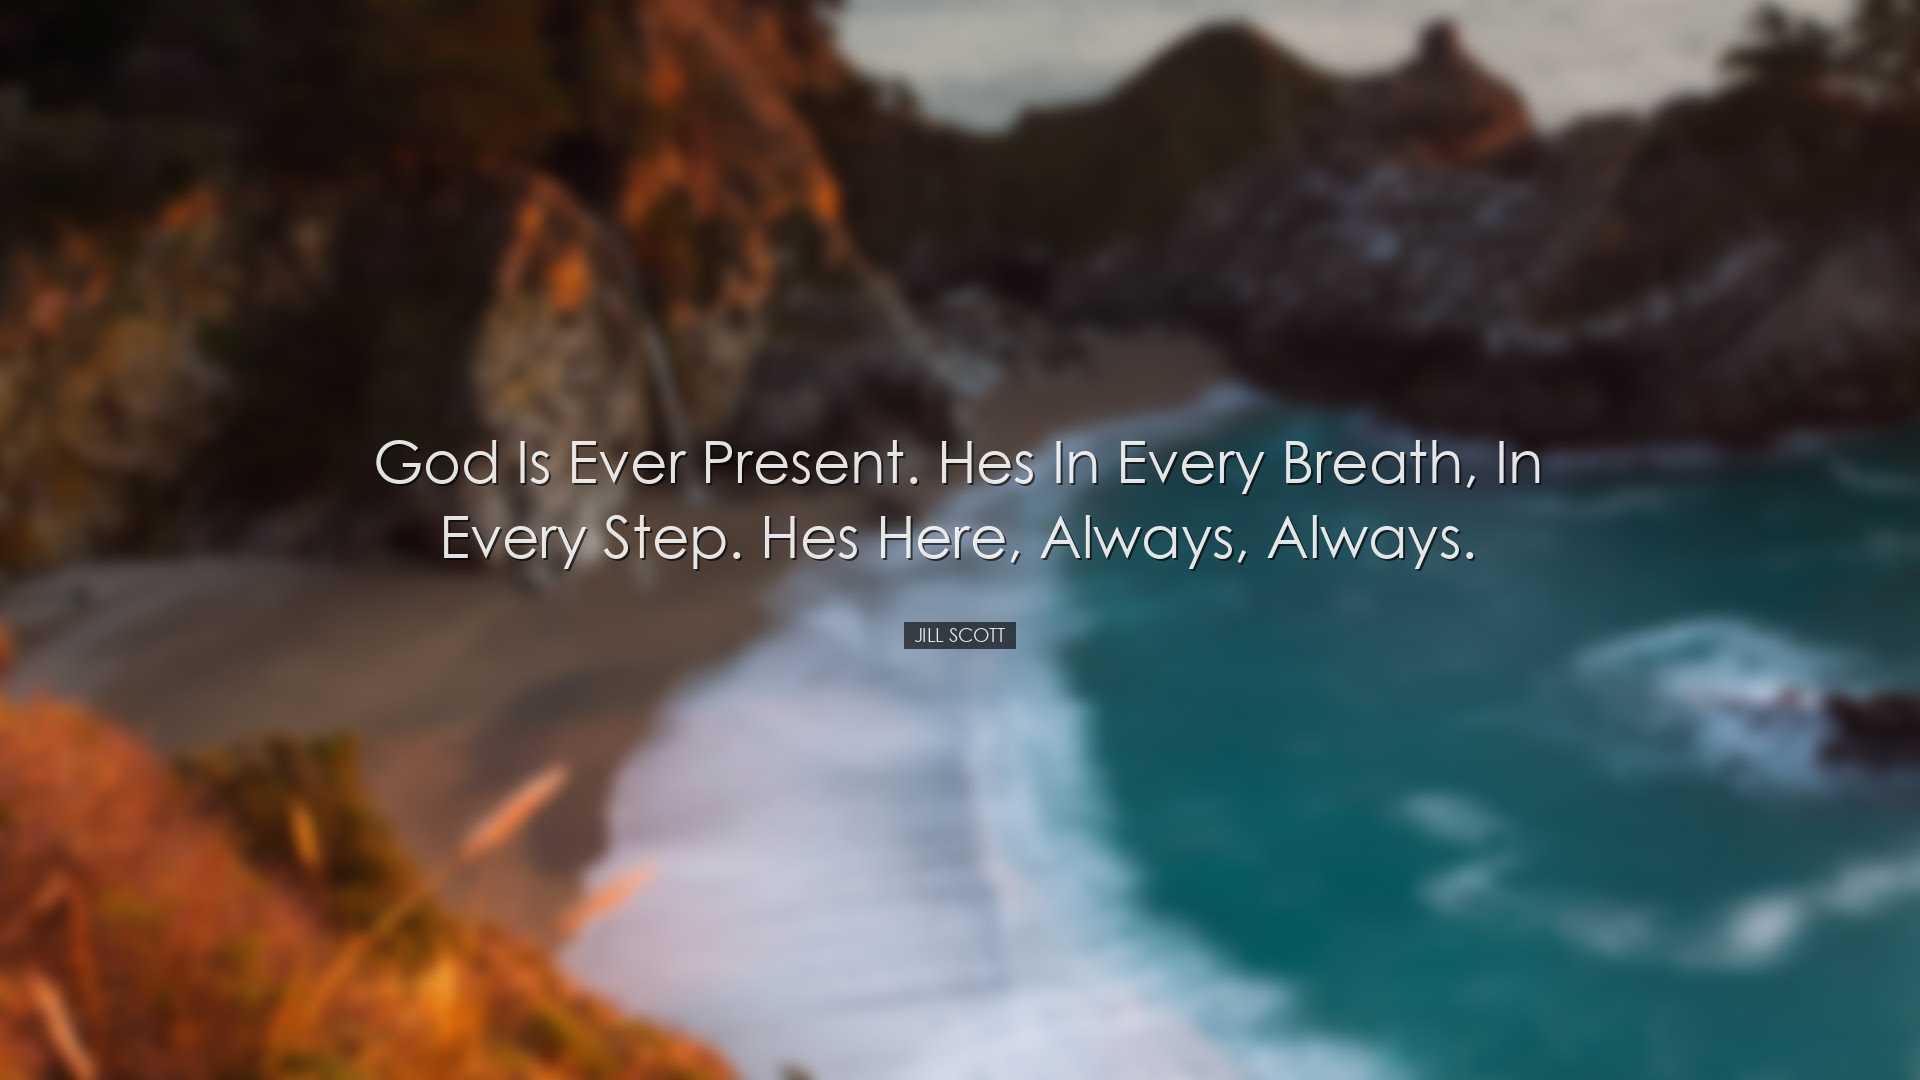 God is ever present. Hes in every breath, in every step. Hes here,